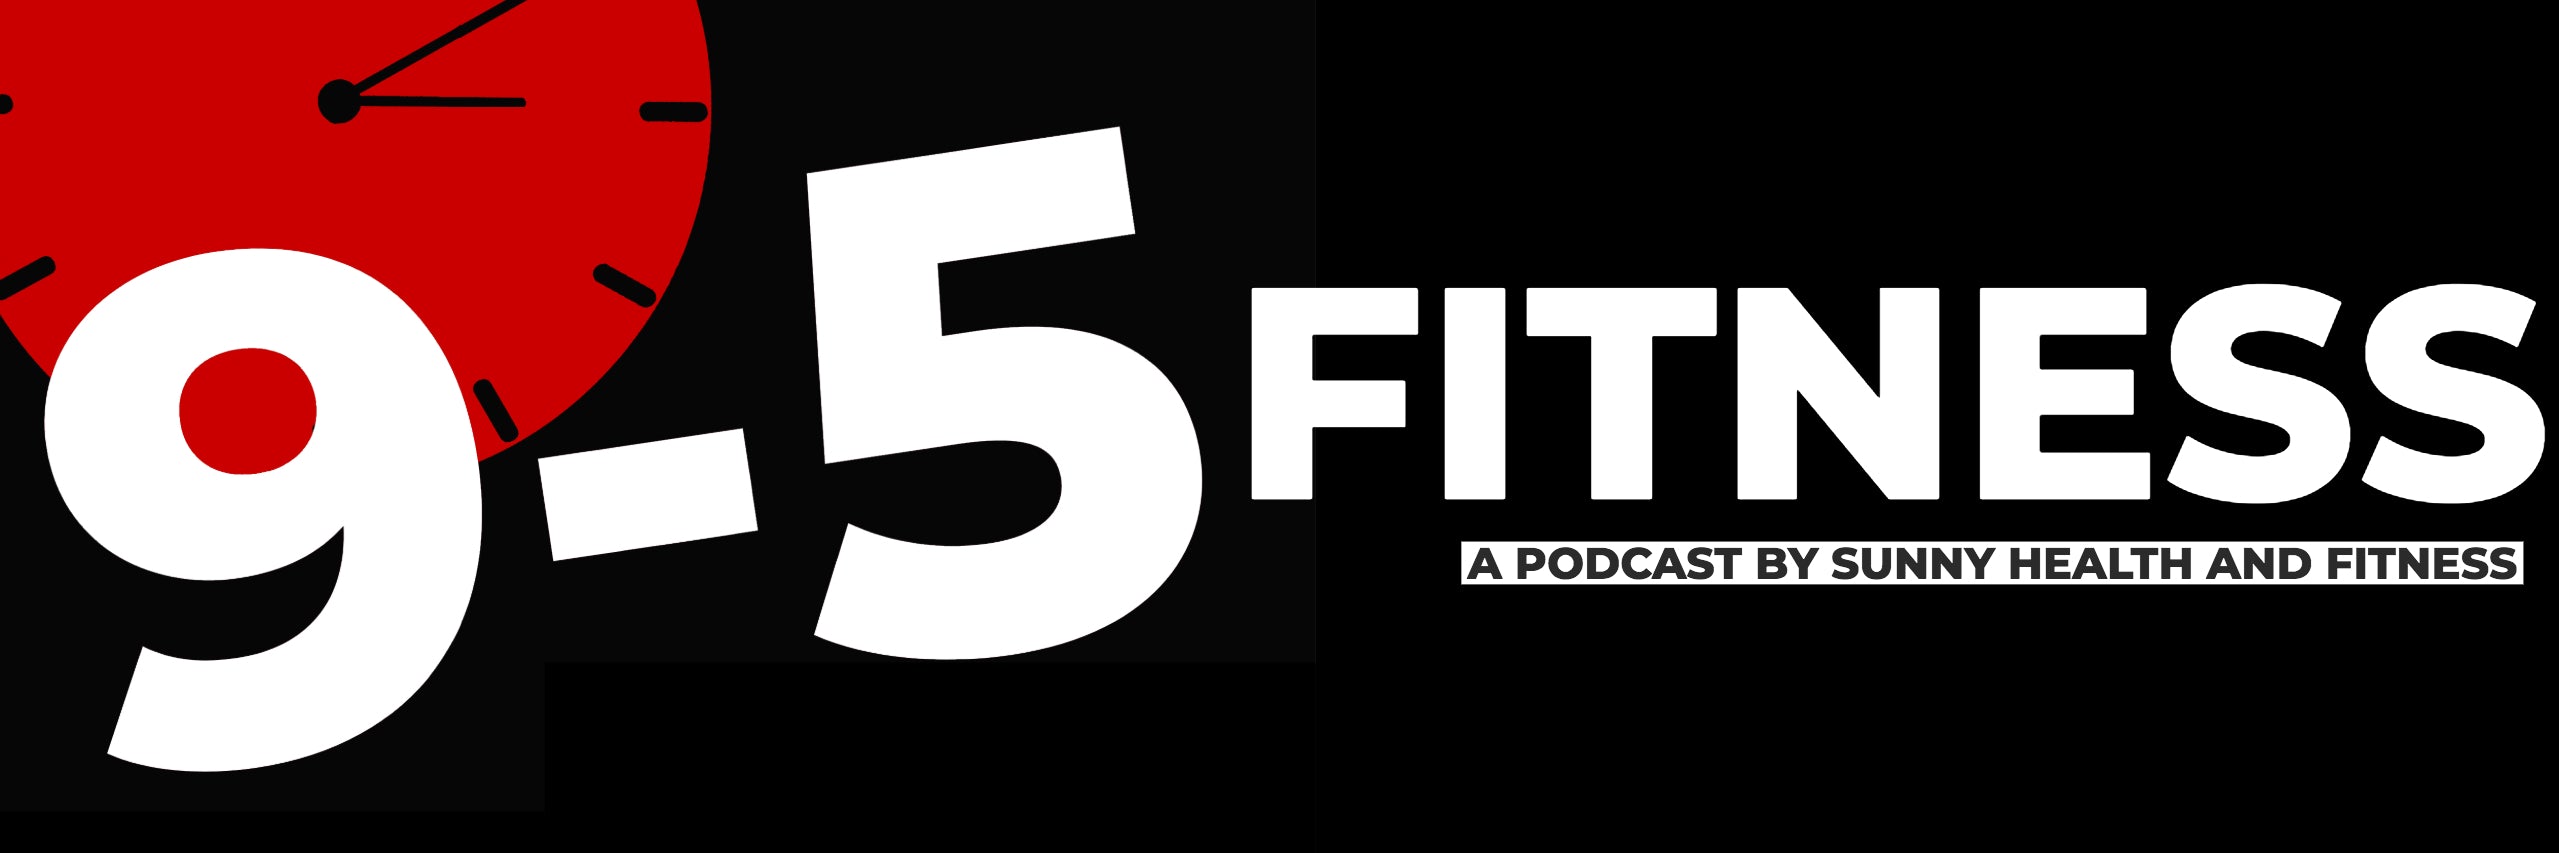 9 - 5 Fitness podcast banner with red clock silhouette in left upper corner